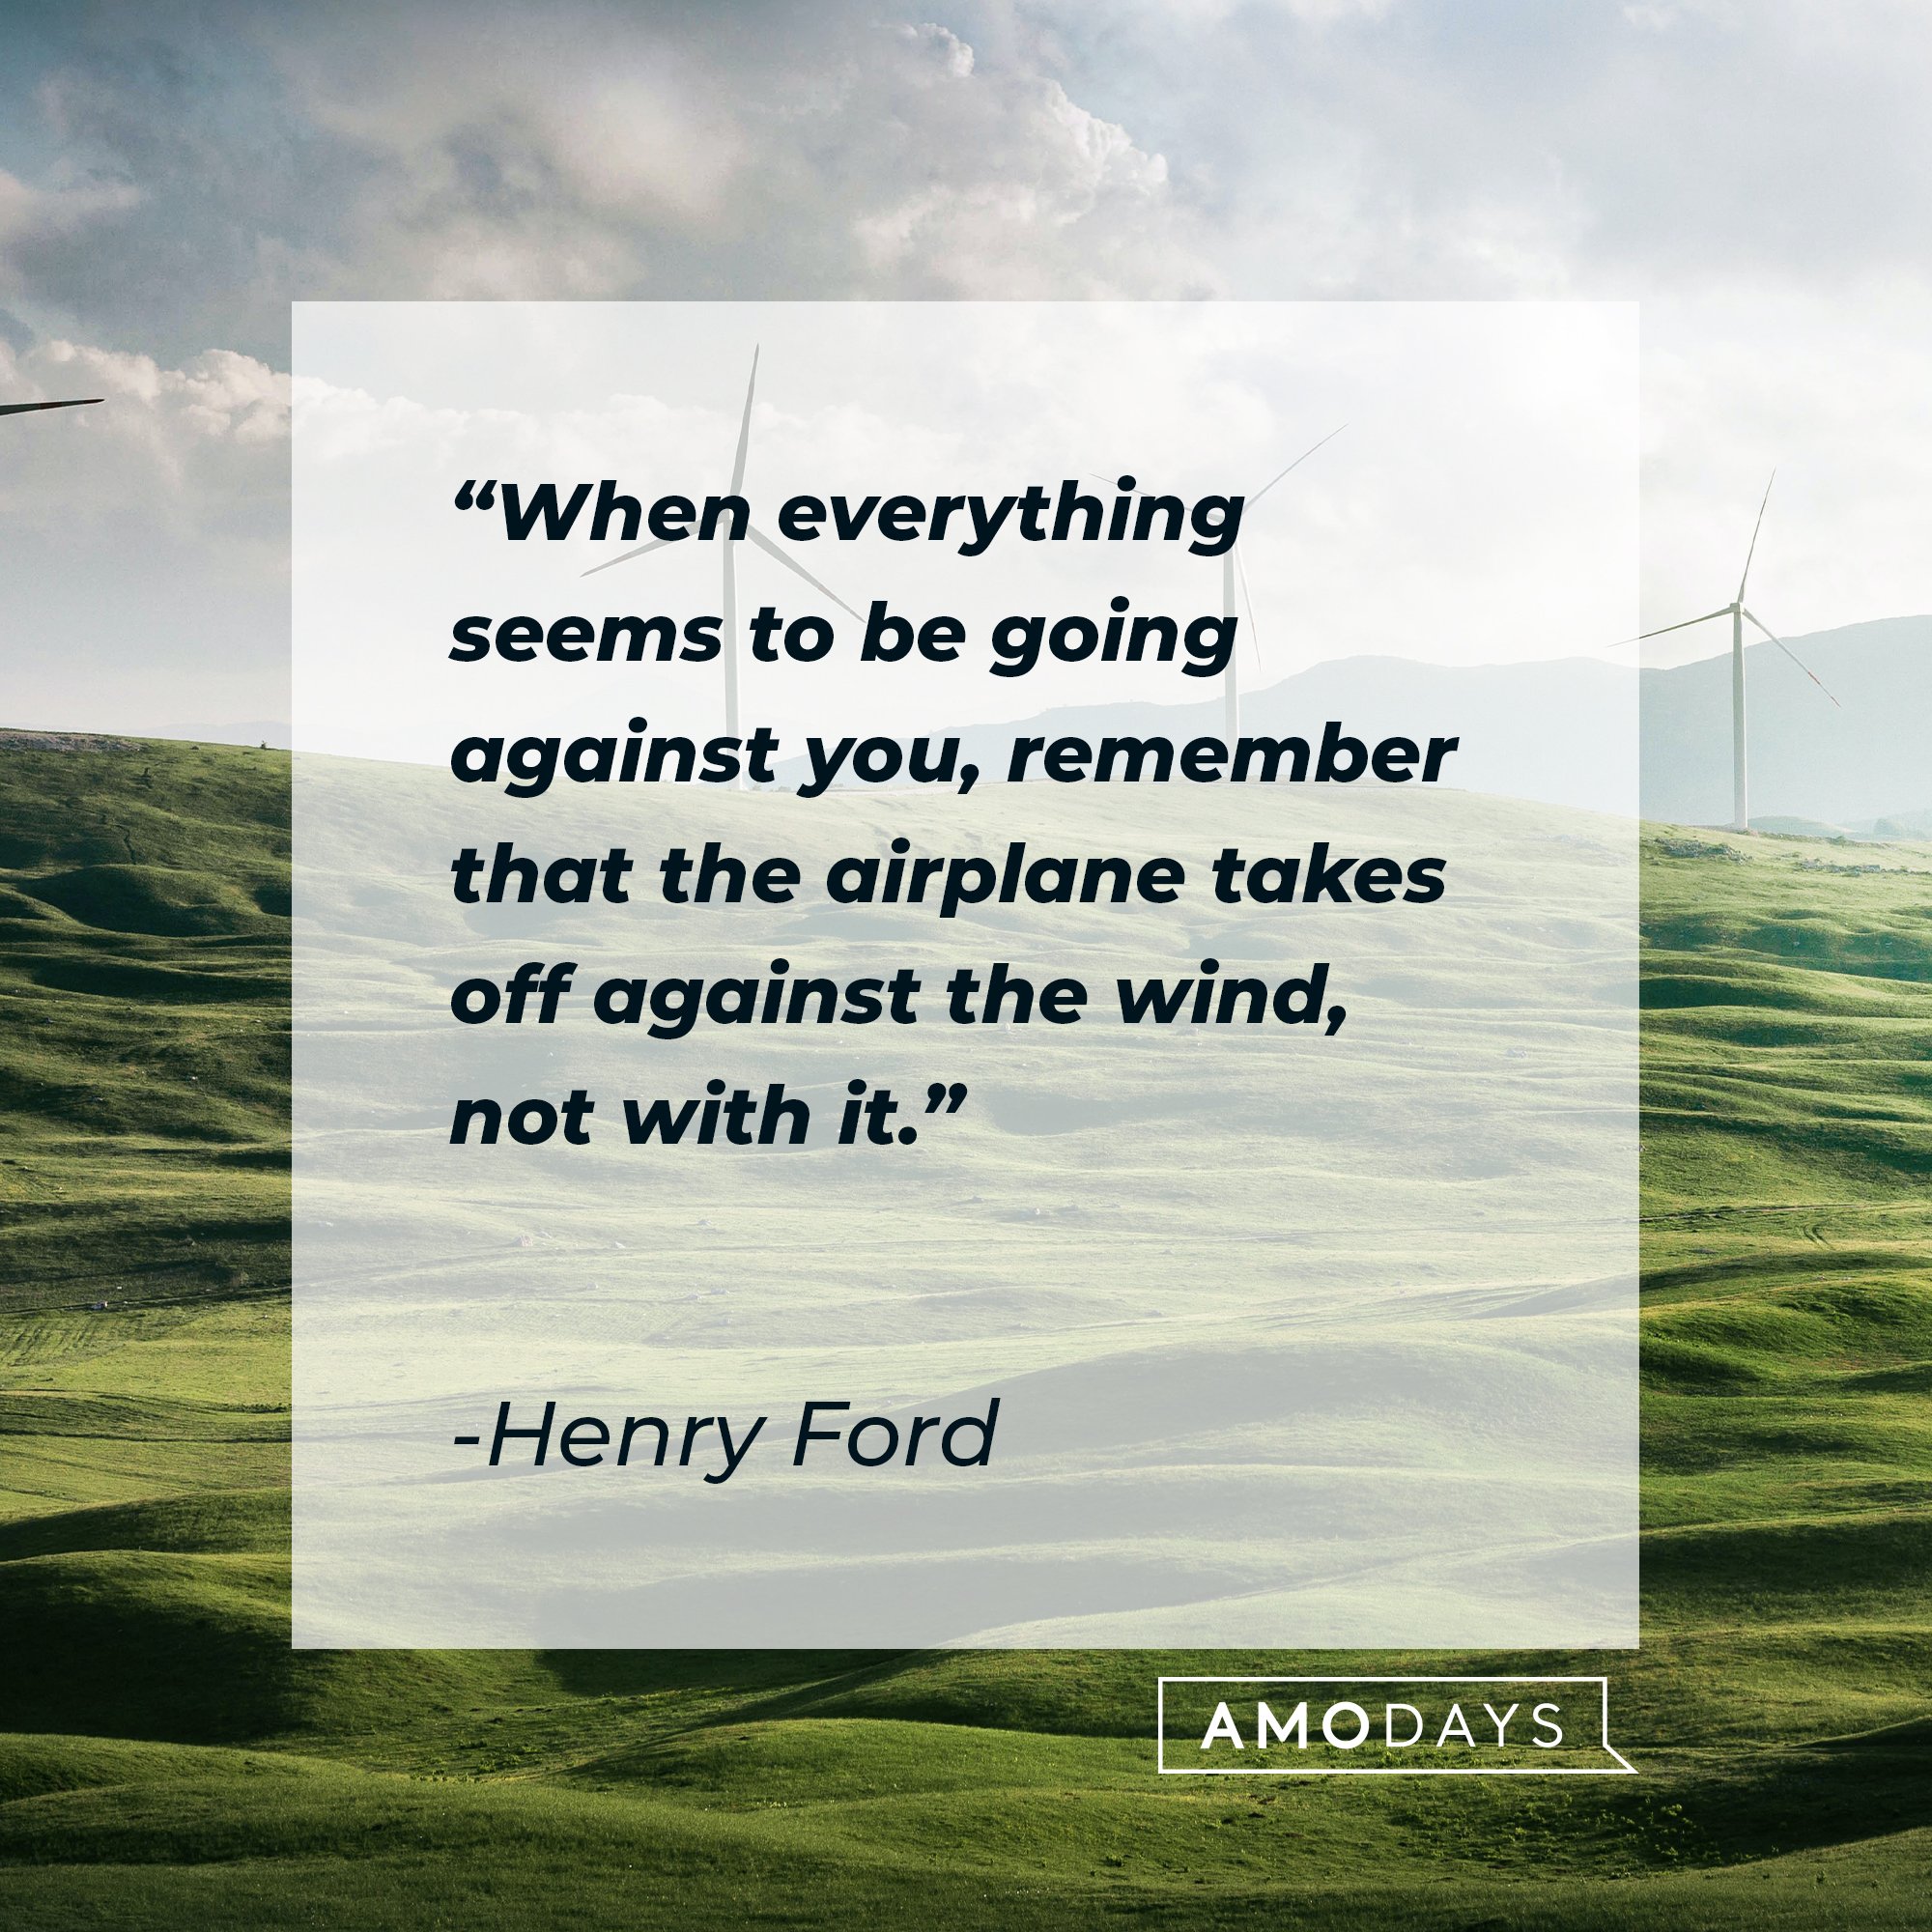 Henry Ford's quote: "When everything seems to be going against you, remember that the airplane takes off against the wind, not with it." | Image: AmoDays